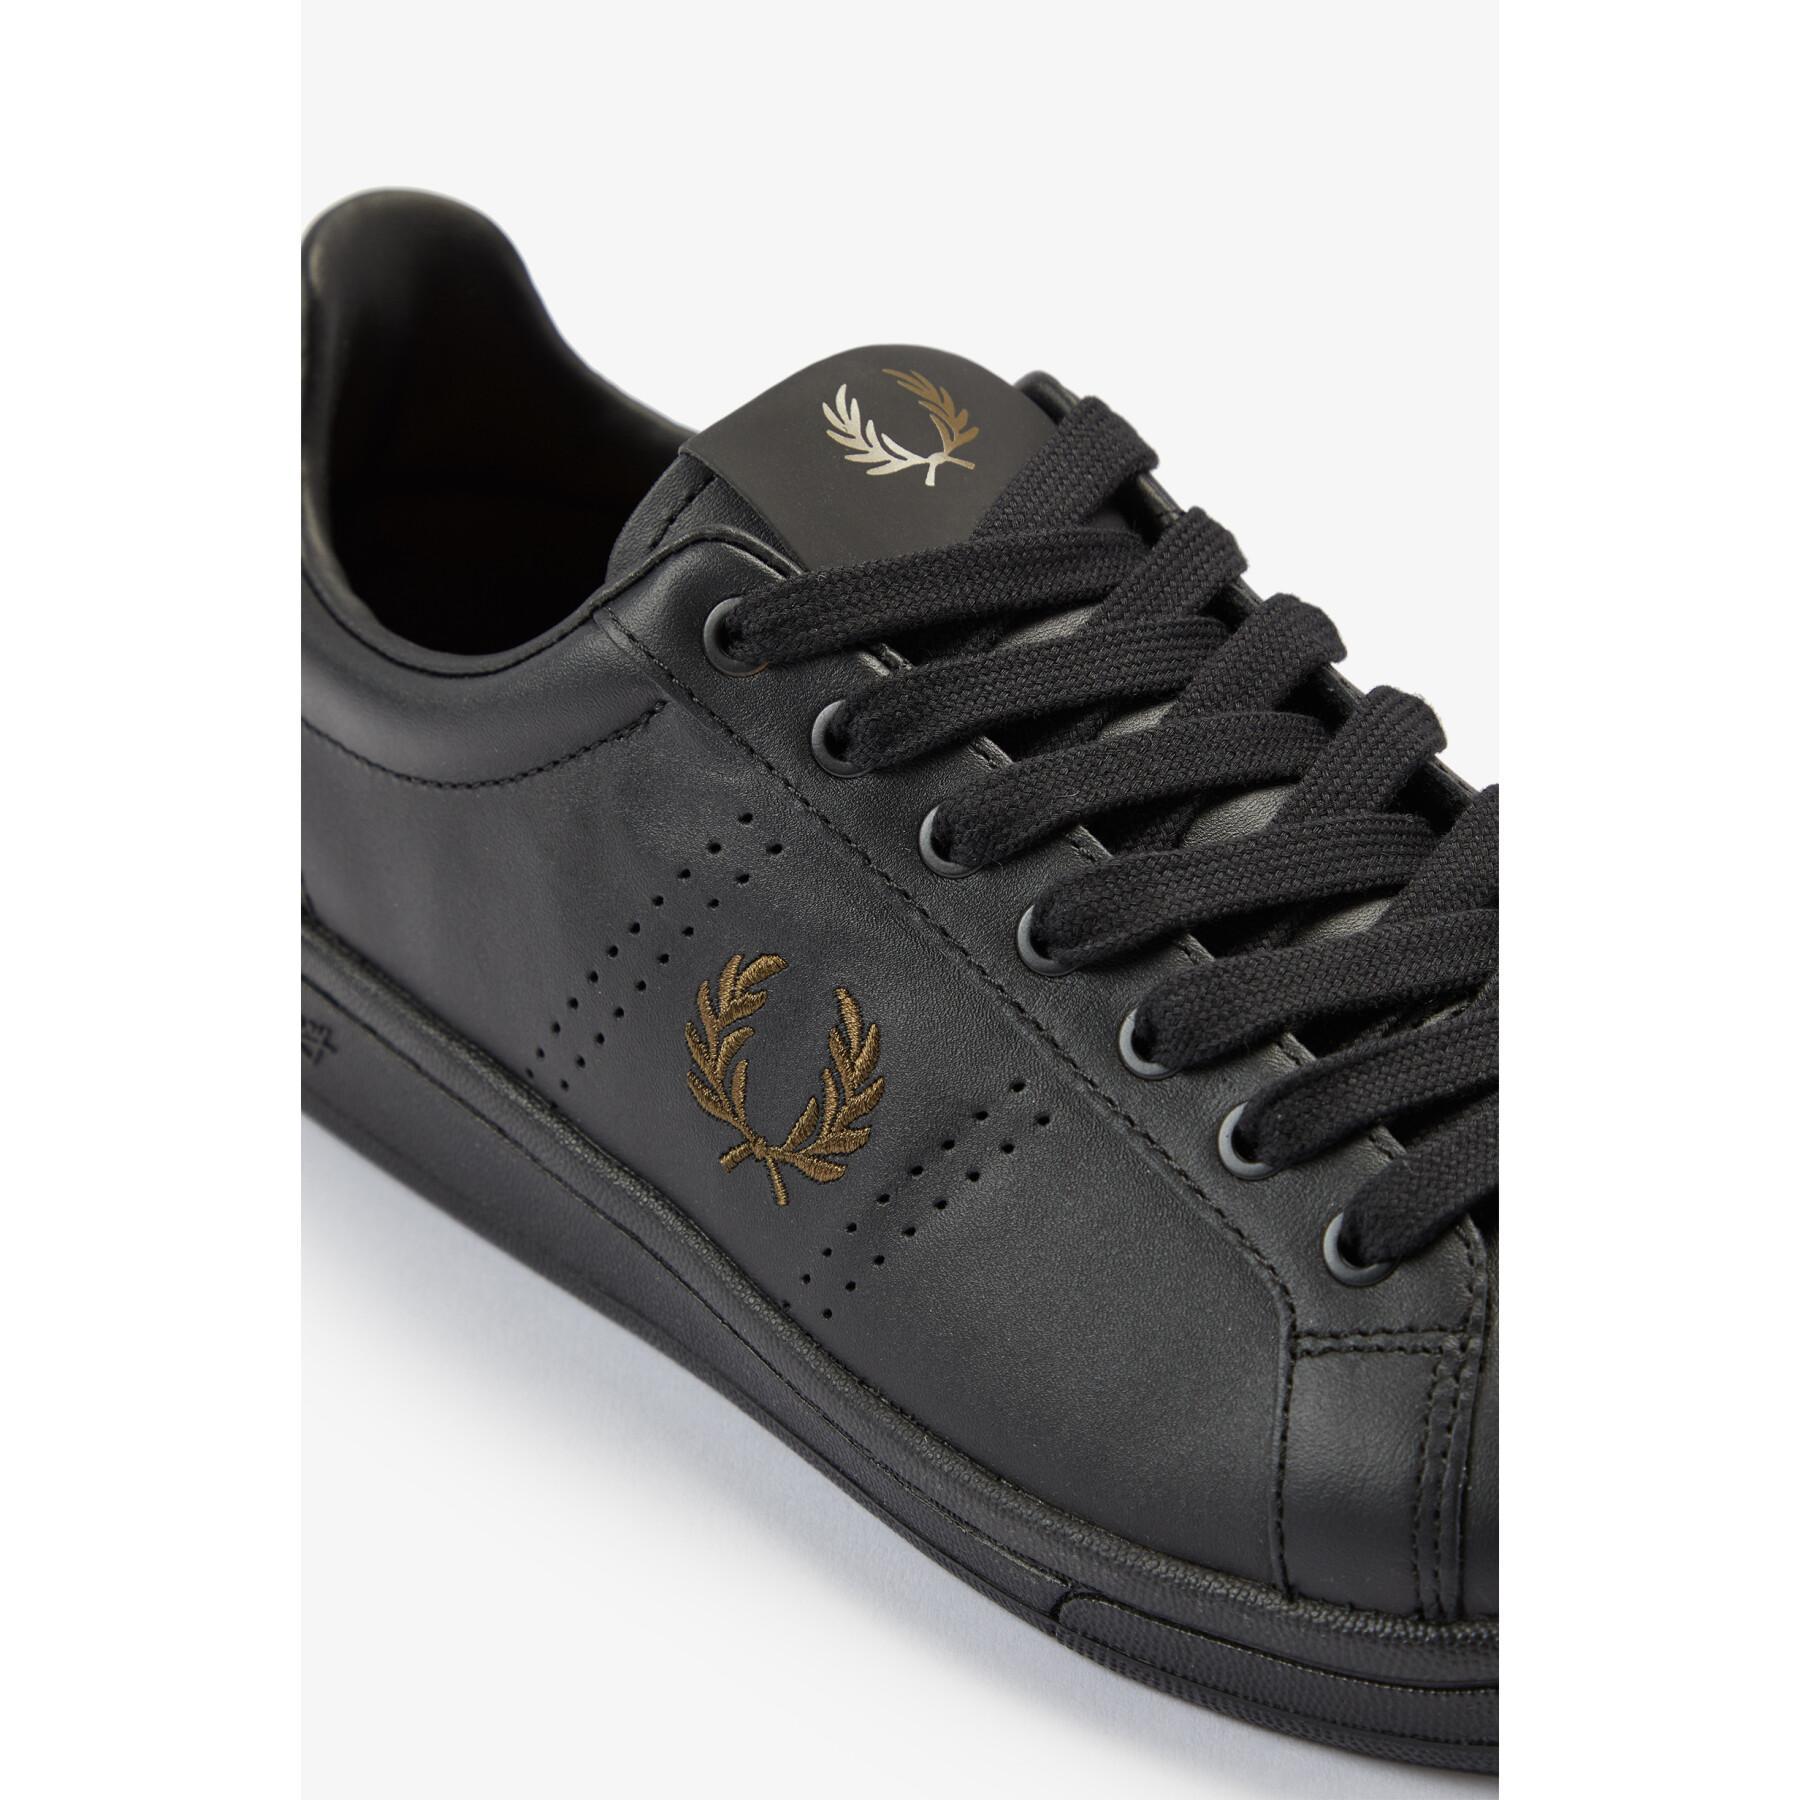 Trenerzy Fred Perry B721